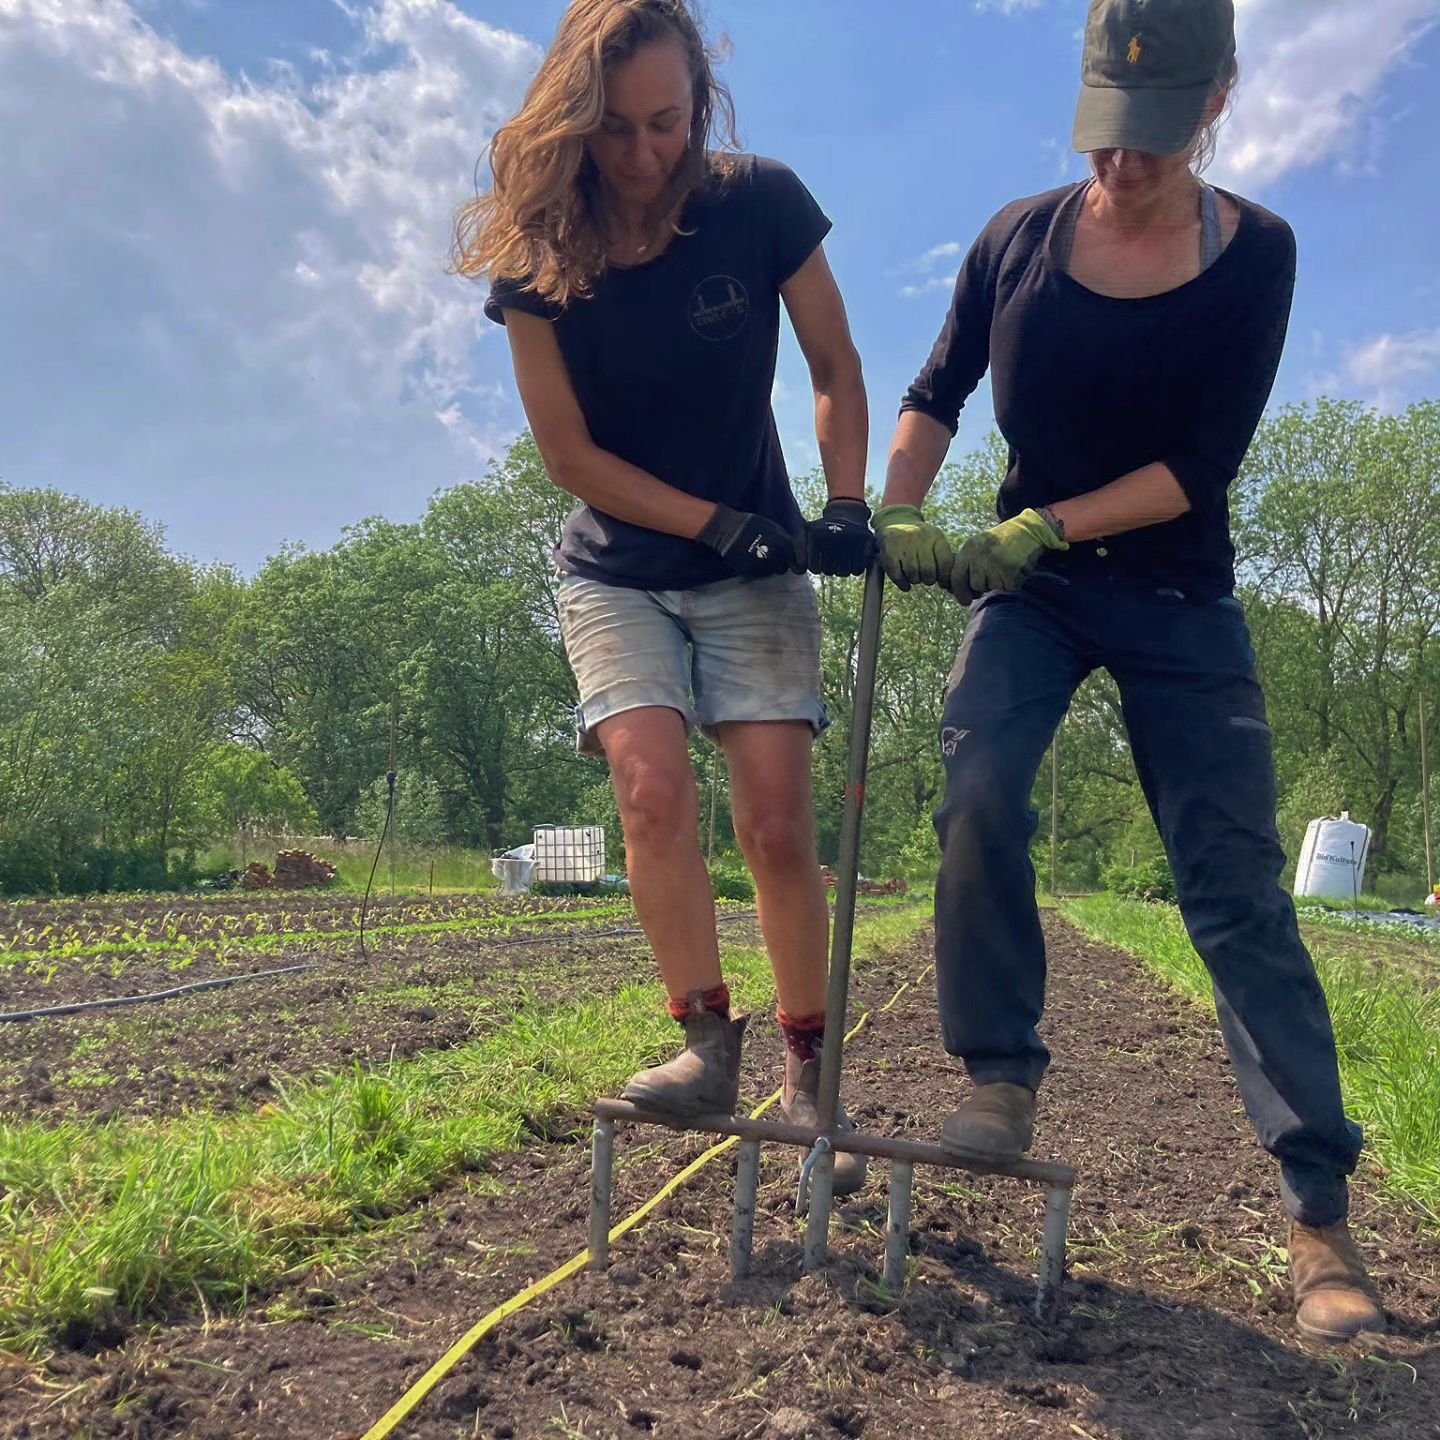 Prei tijd! 
Leek time! 
To deeply plant the leeks, we make first a deep hole! 
And dibbling that planting hole is a challenge for two tiny women 🤣. 
Teamwork makes dreams work 🥰
And an hour later 1000 leeks were in the ground. 
#csaamsterdam #desta